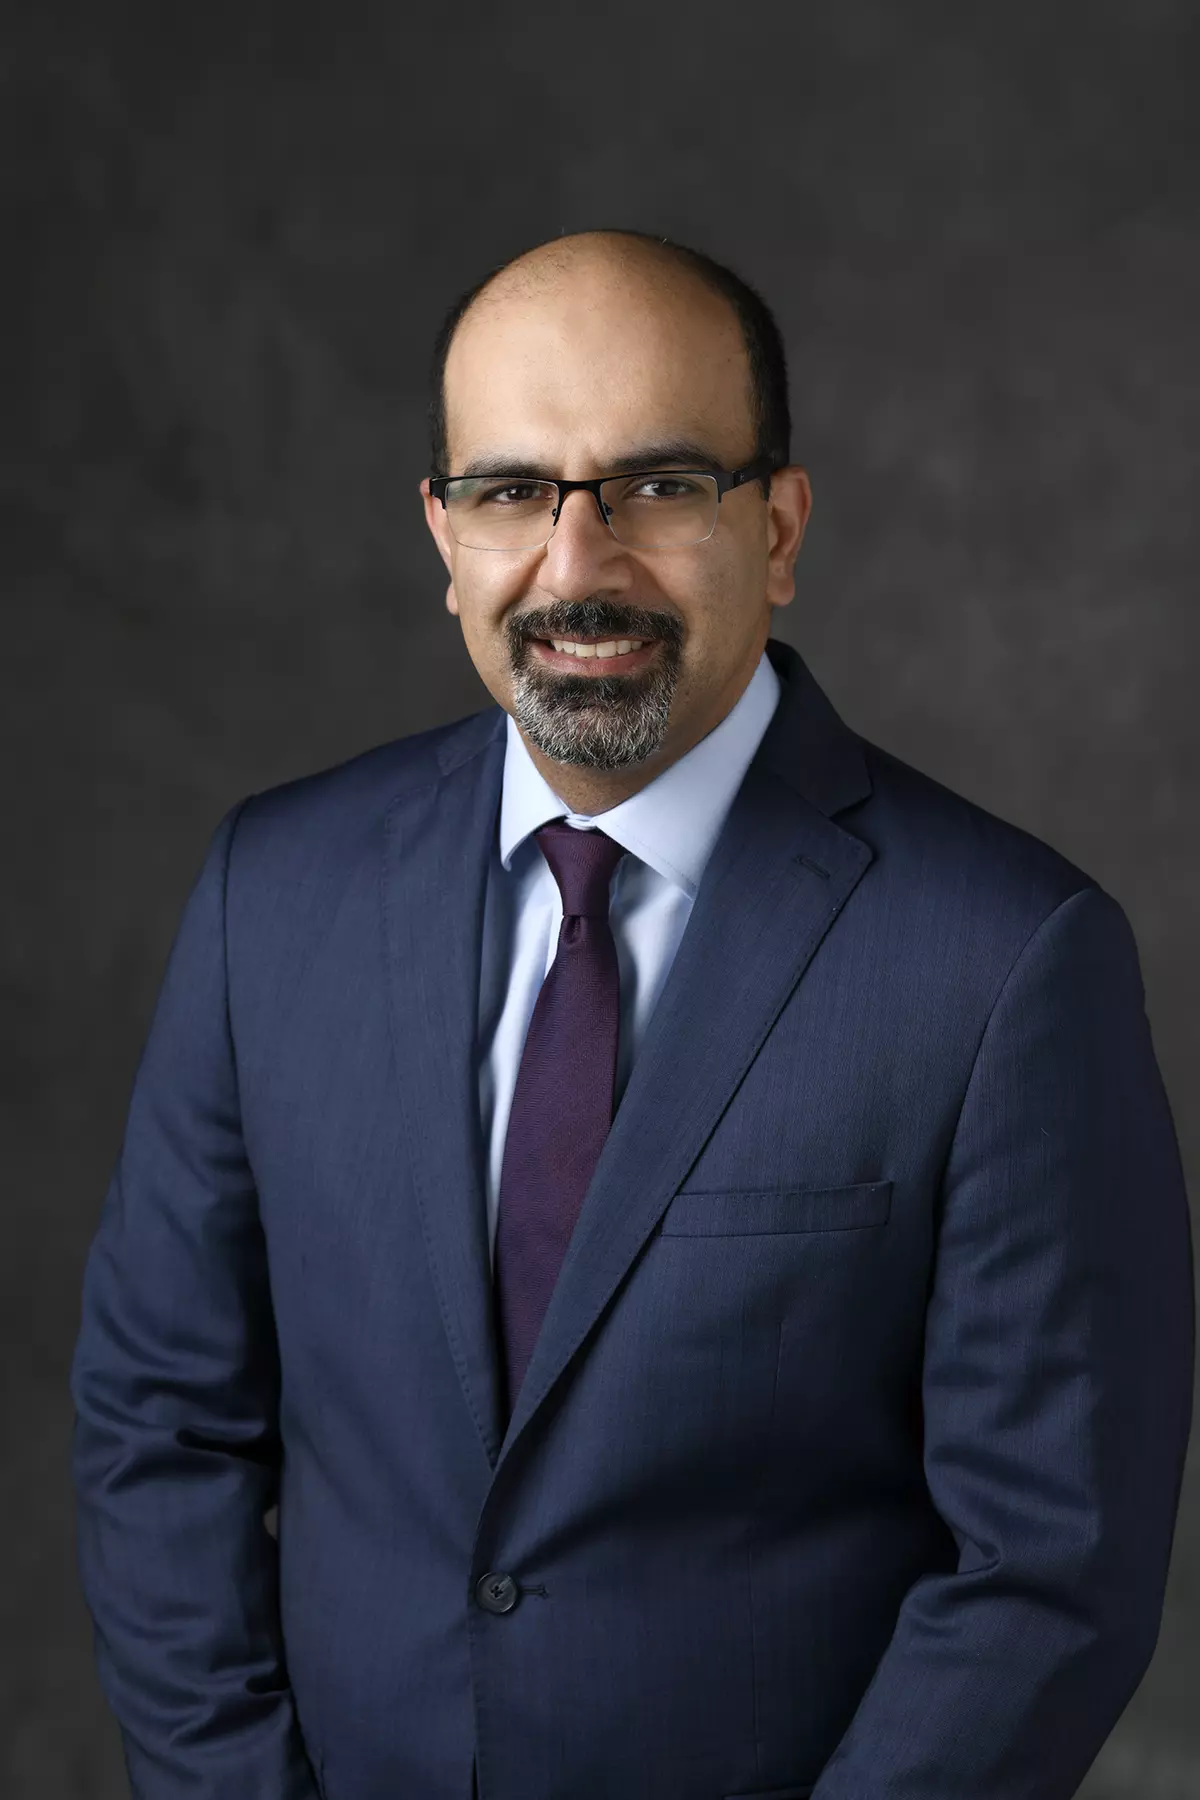 "Pancreatic conditions can be difficult to diagnose, and the symptoms can be difficult to treat." - Dr. Mustafa A. Arain, AdventHealth Center for Interventional Endoscopy